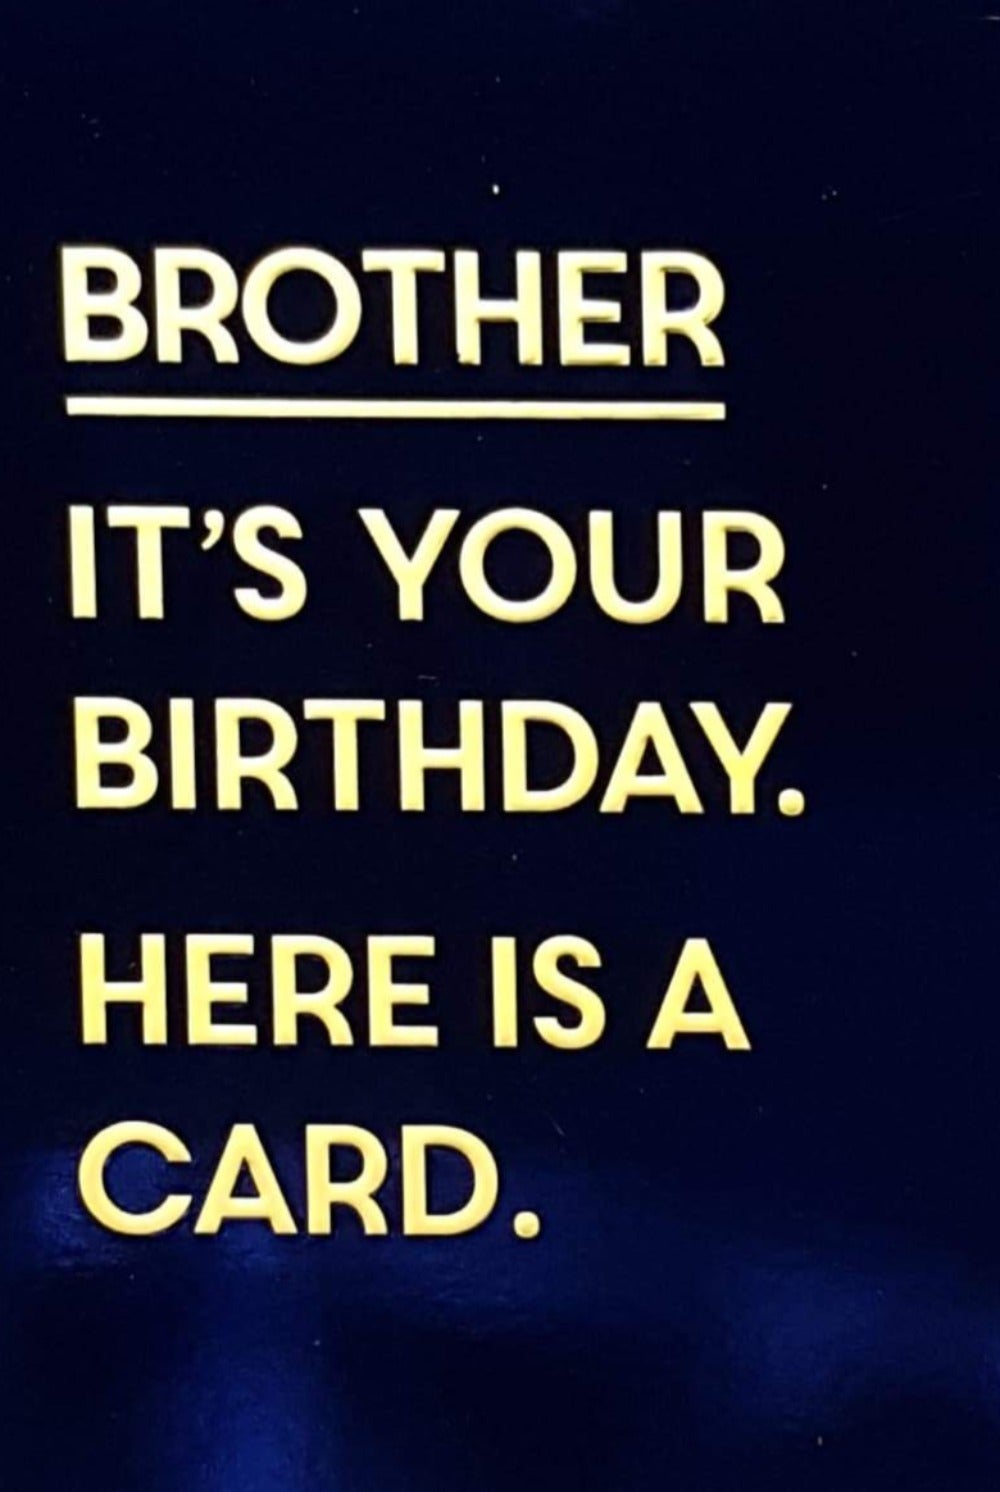 Birthday Card - Brother / 'Here Is A Card'